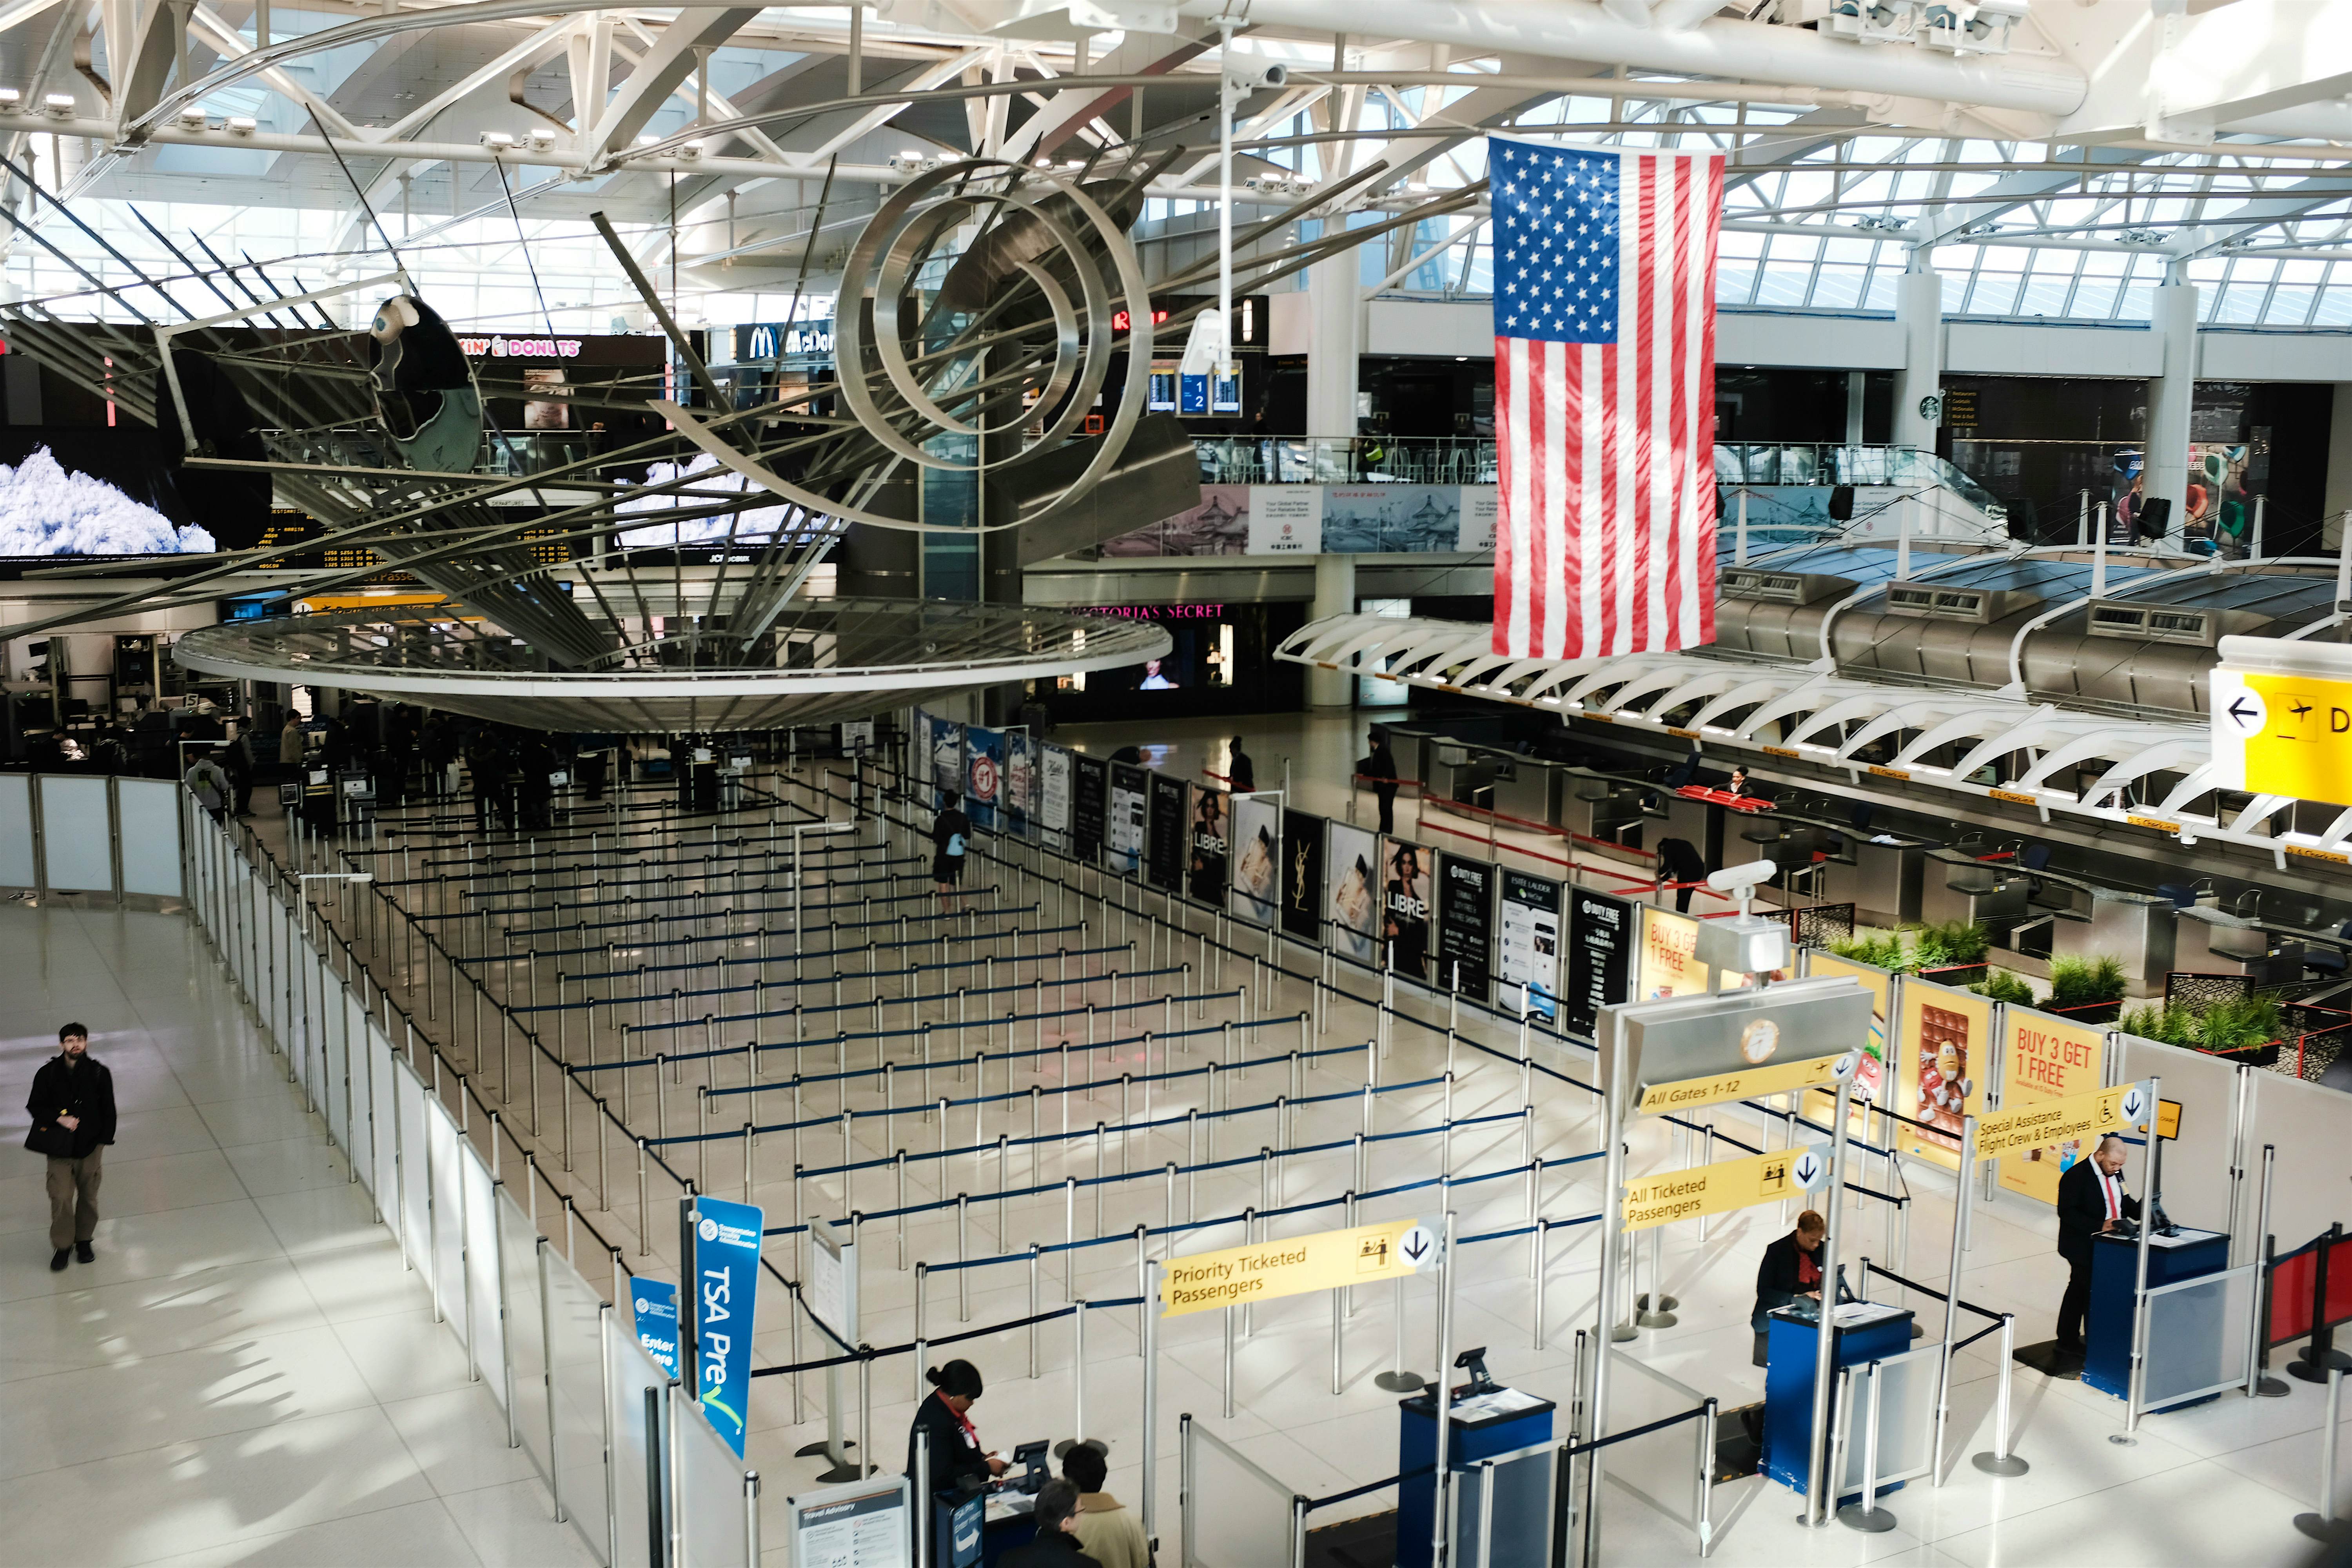 An empty line-up at an airport. An American flag and some installations hang overhead